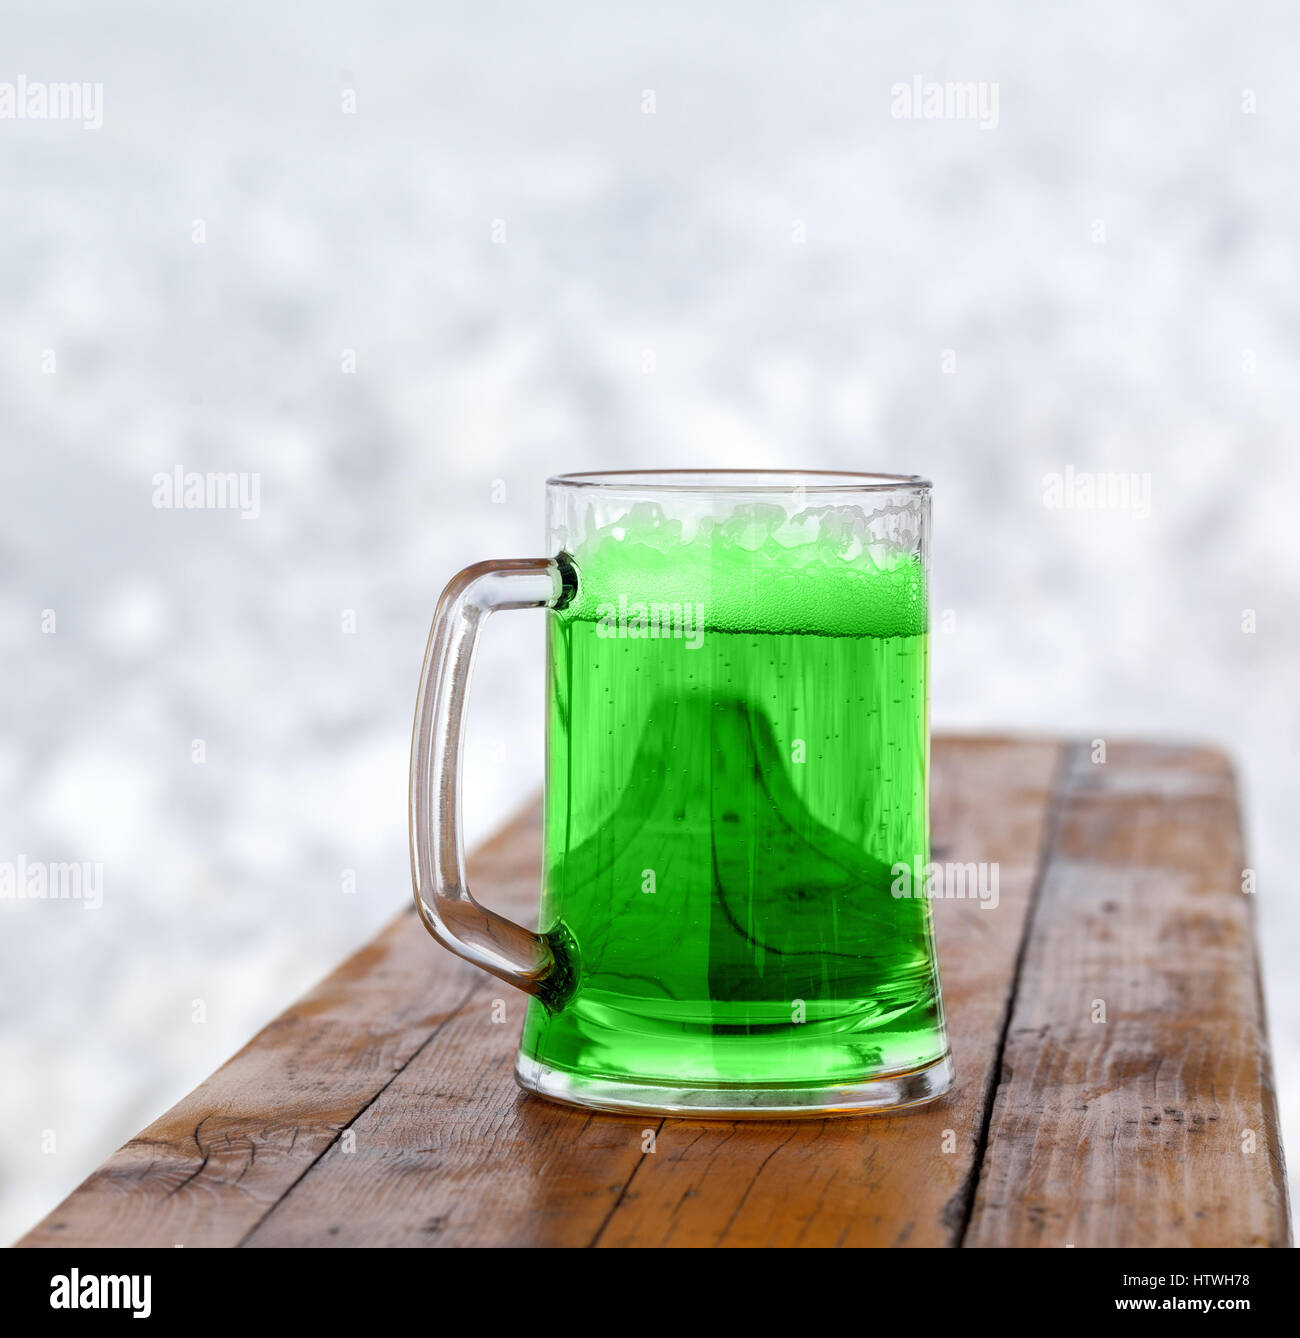 St. Patricks Day. Full fresh cold glass of green beer on wooden bench. Stock Photo